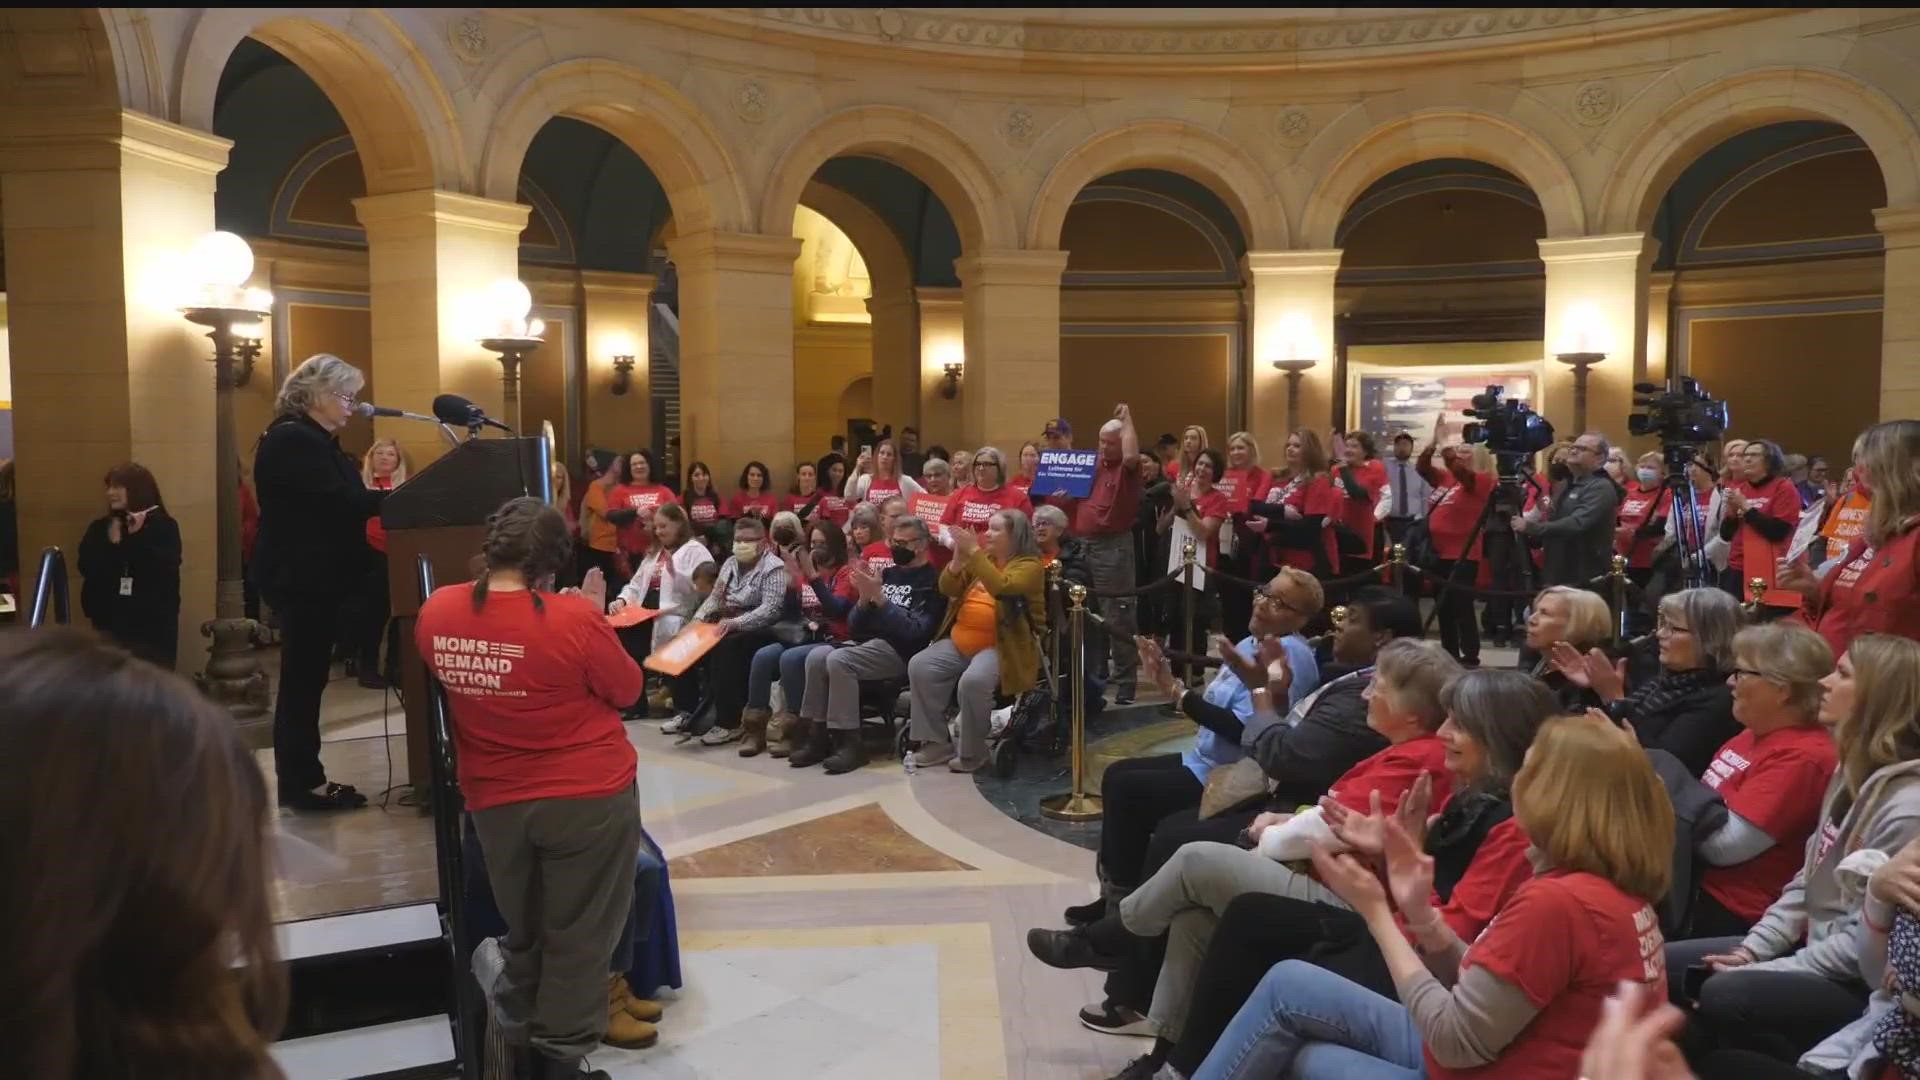 A large crowd rallied in the State Capitol rotunda Thursday afternoon. The group demanded new gun control measures.